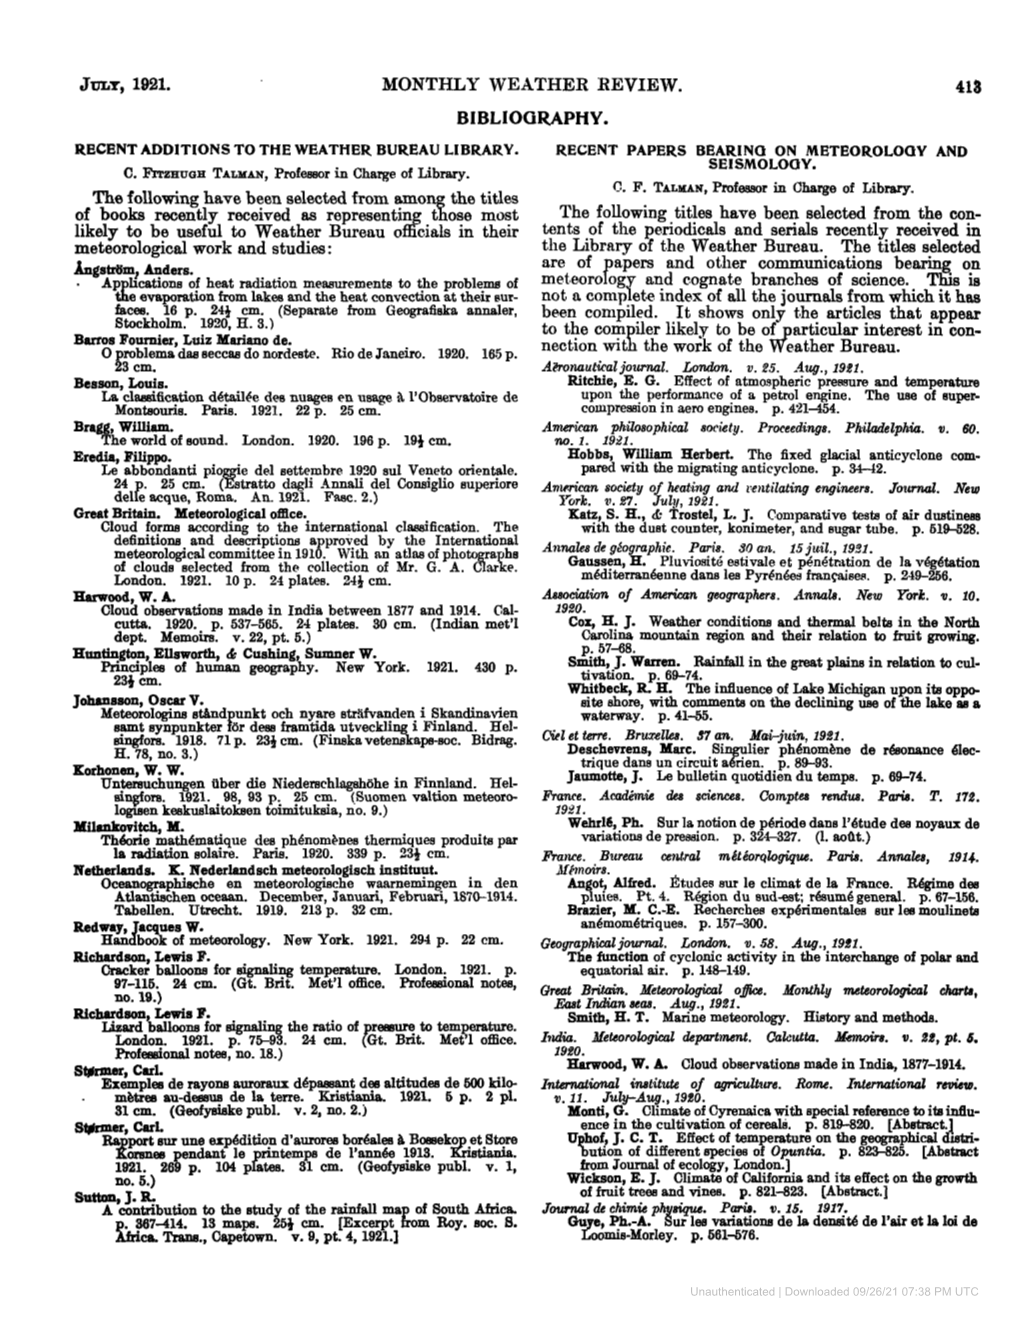 July, 1921. Monthly Weather Review